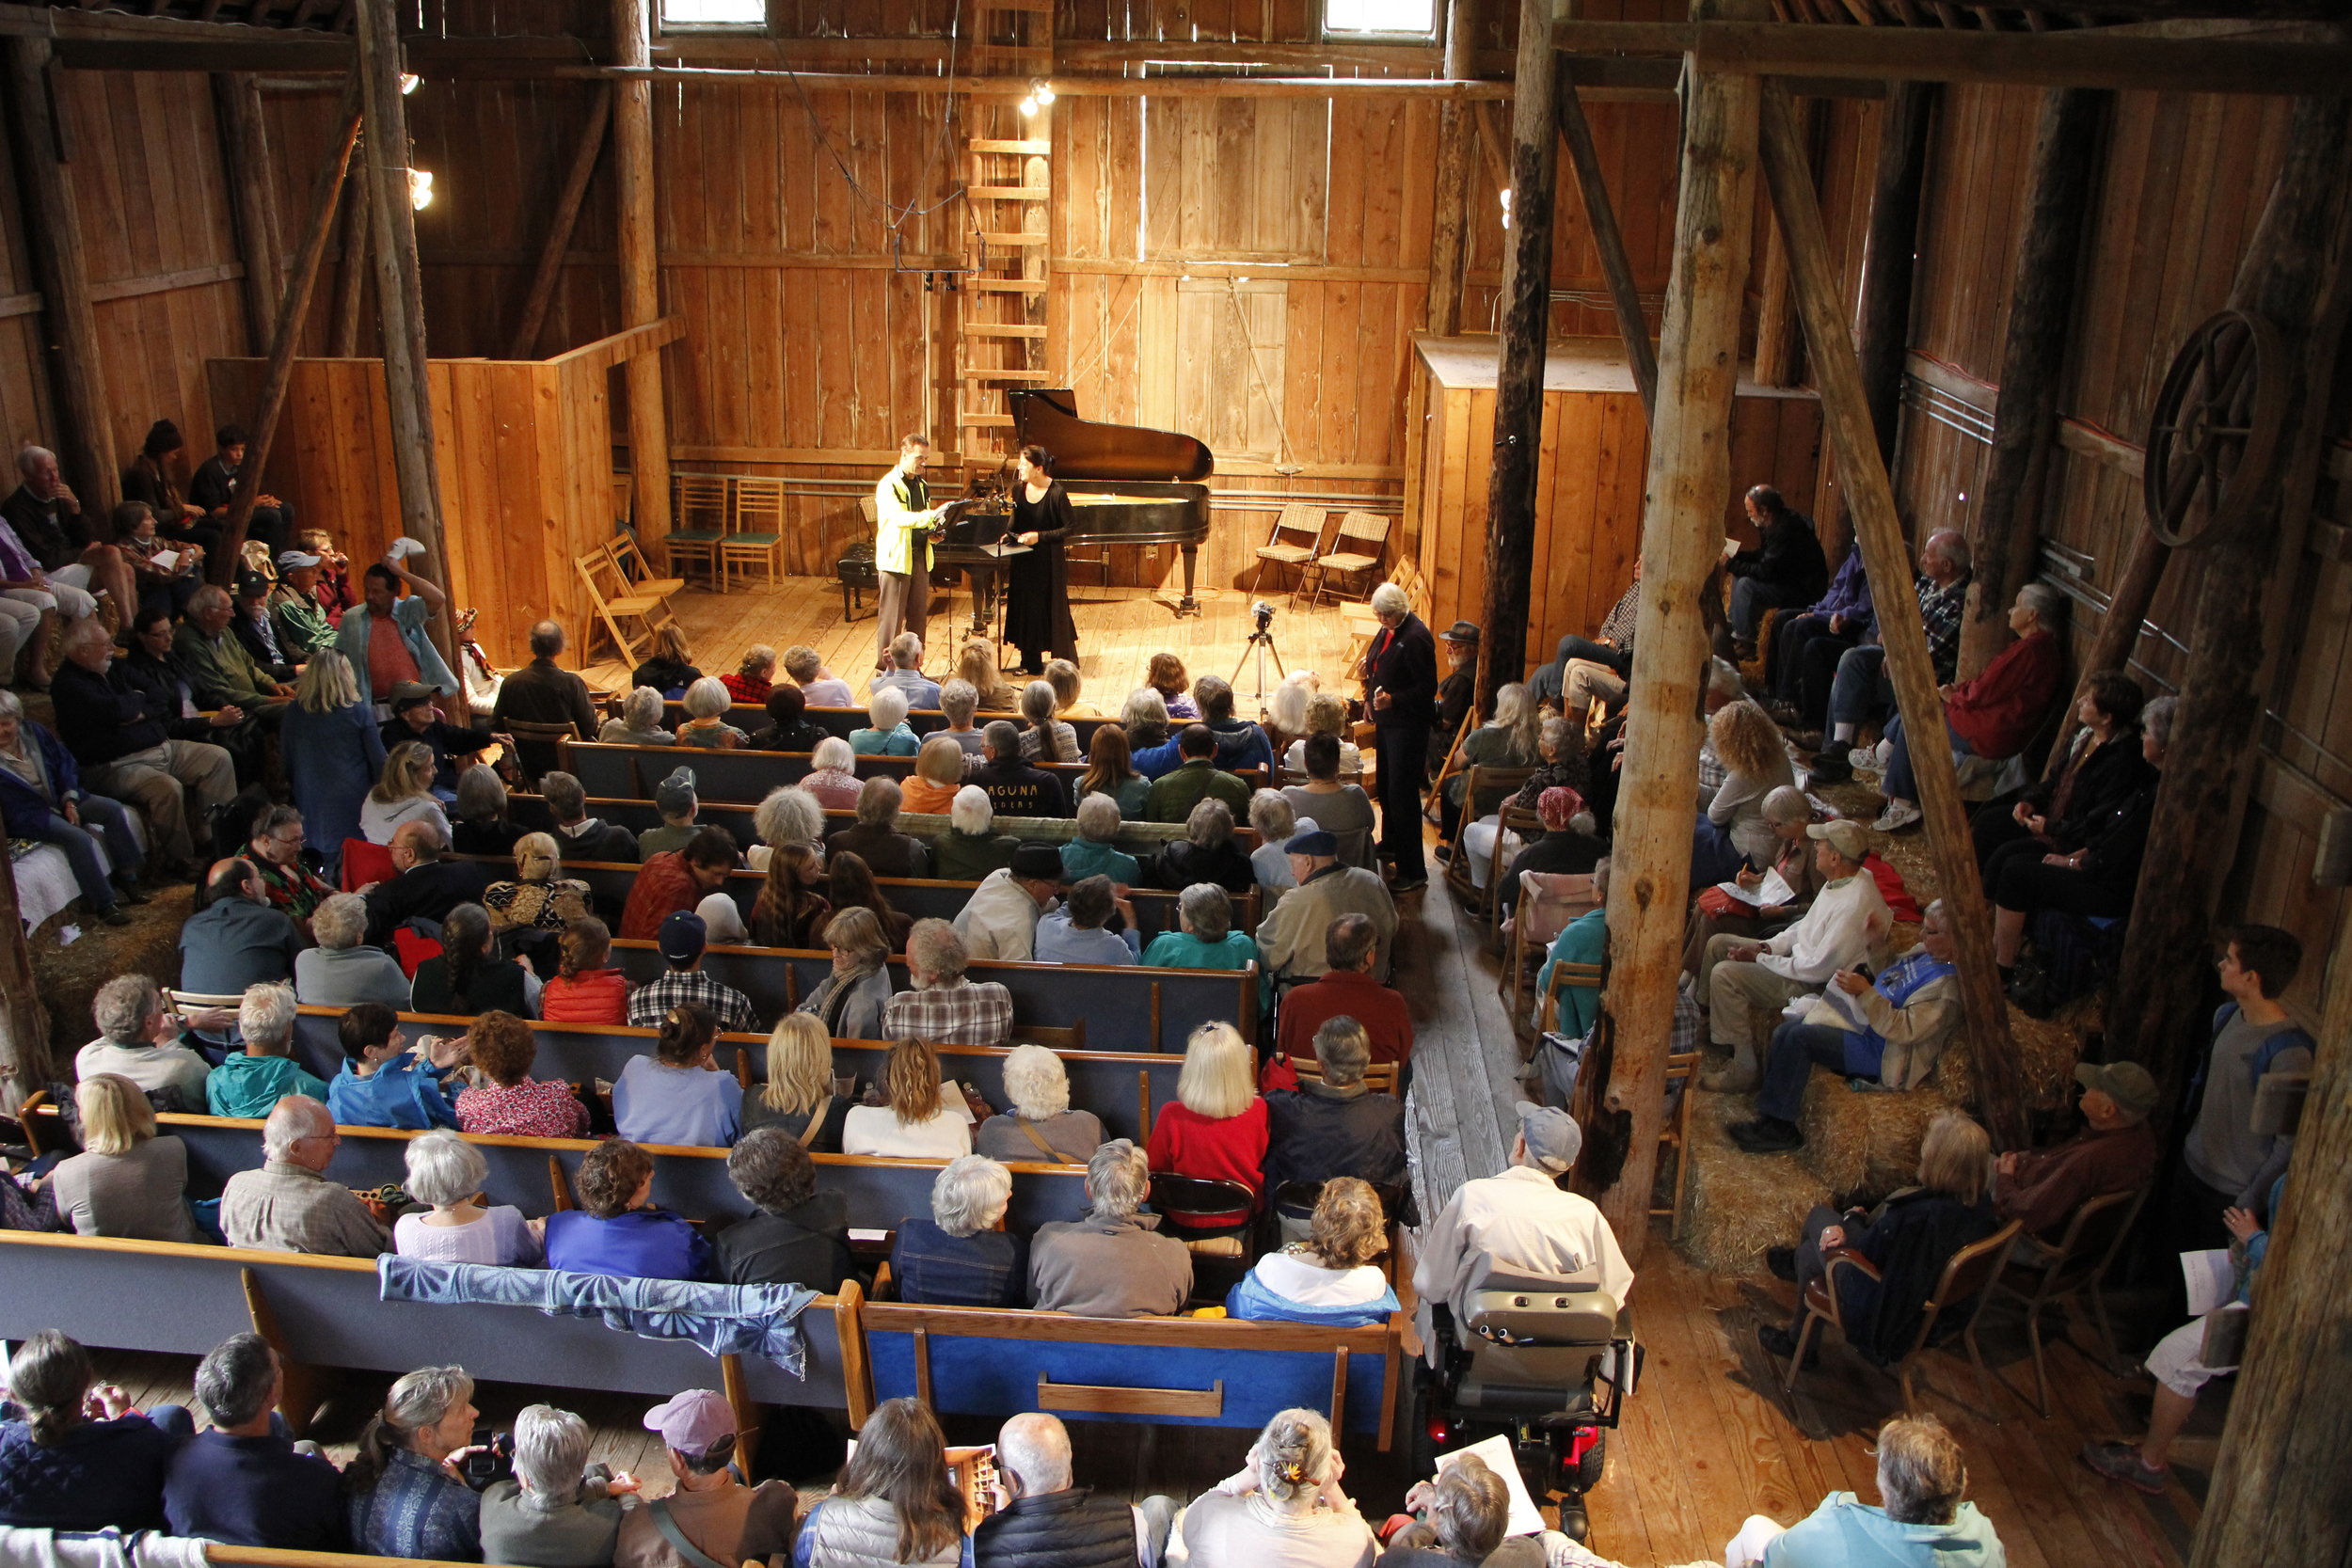 Audience view of inside the Trillium Woods Farm barn